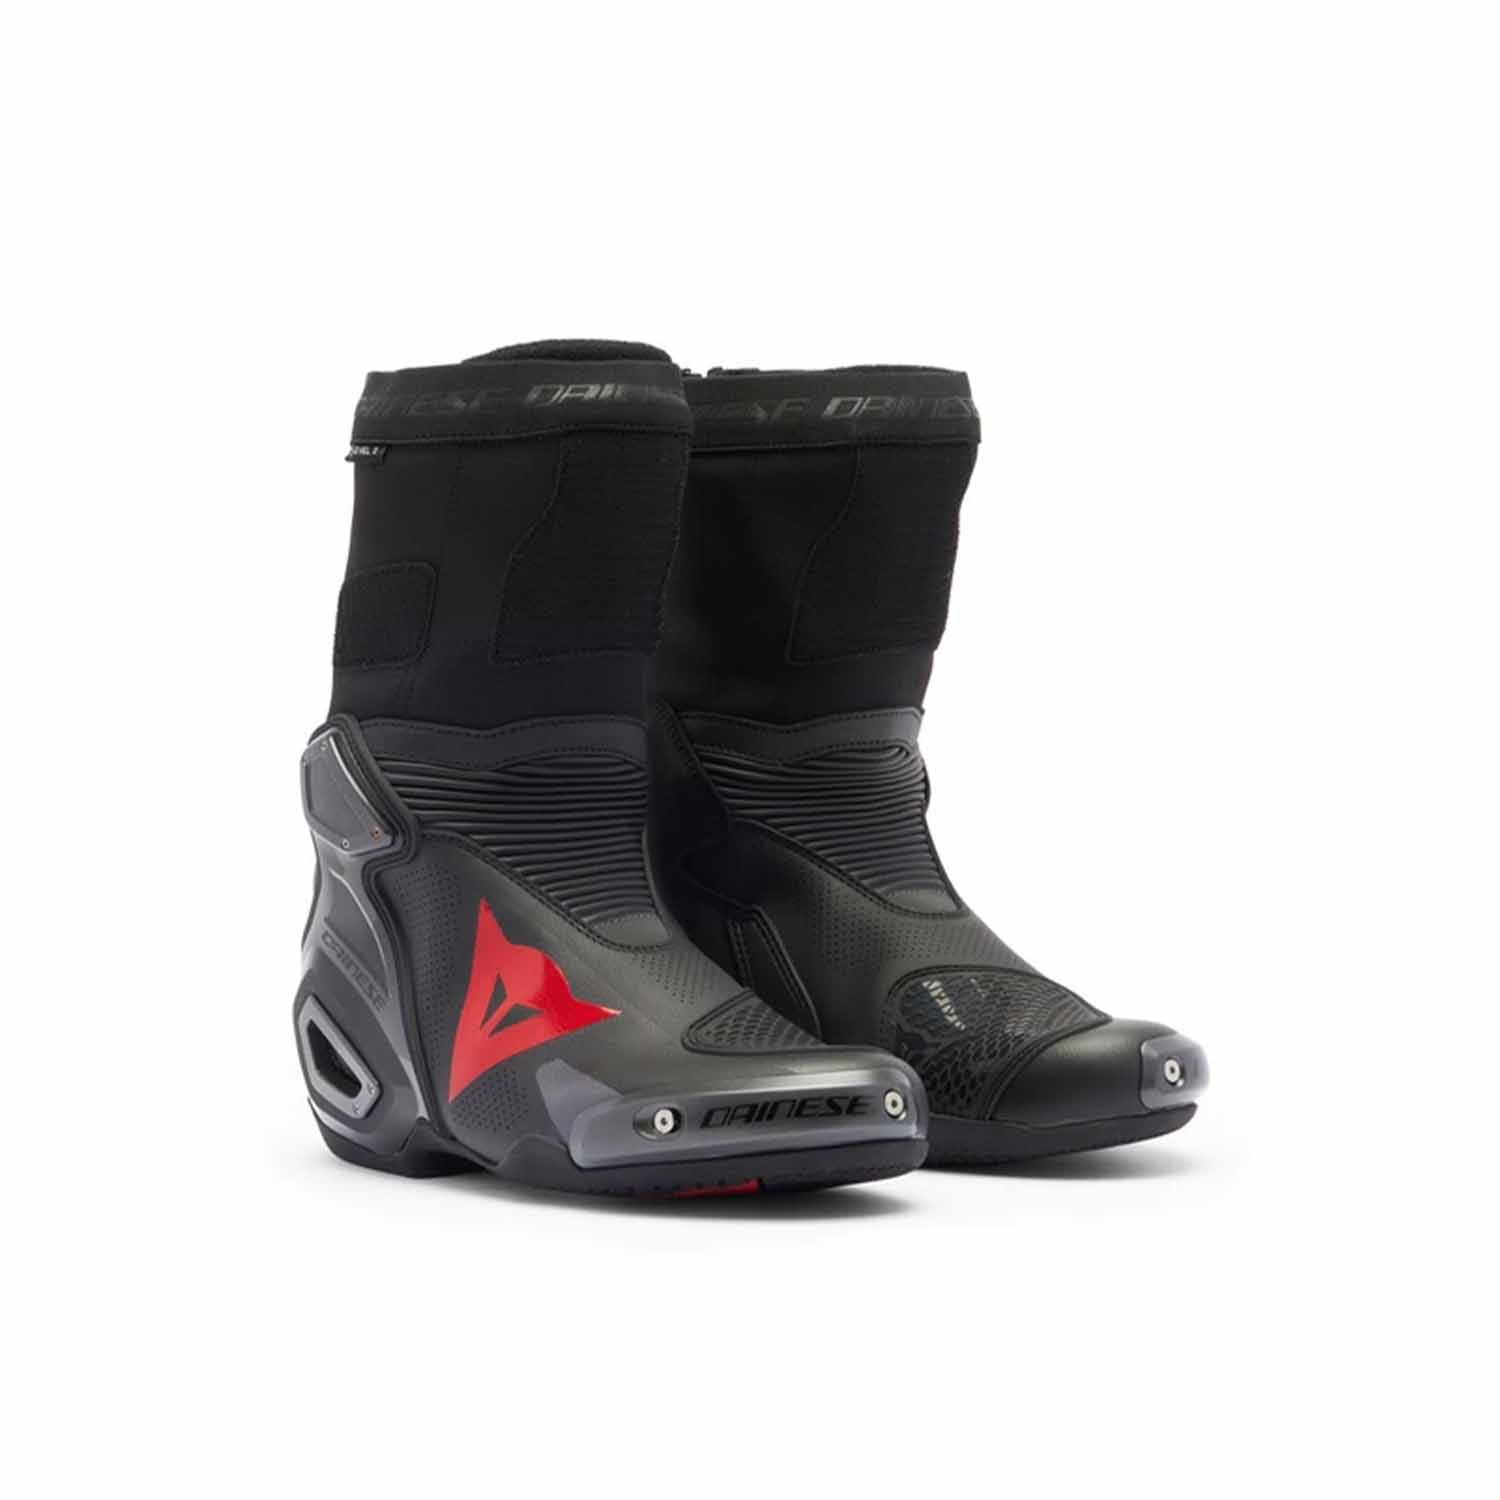 Image of Dainese Axial 2 Air Boots Black Black Red Fluo Taille 42